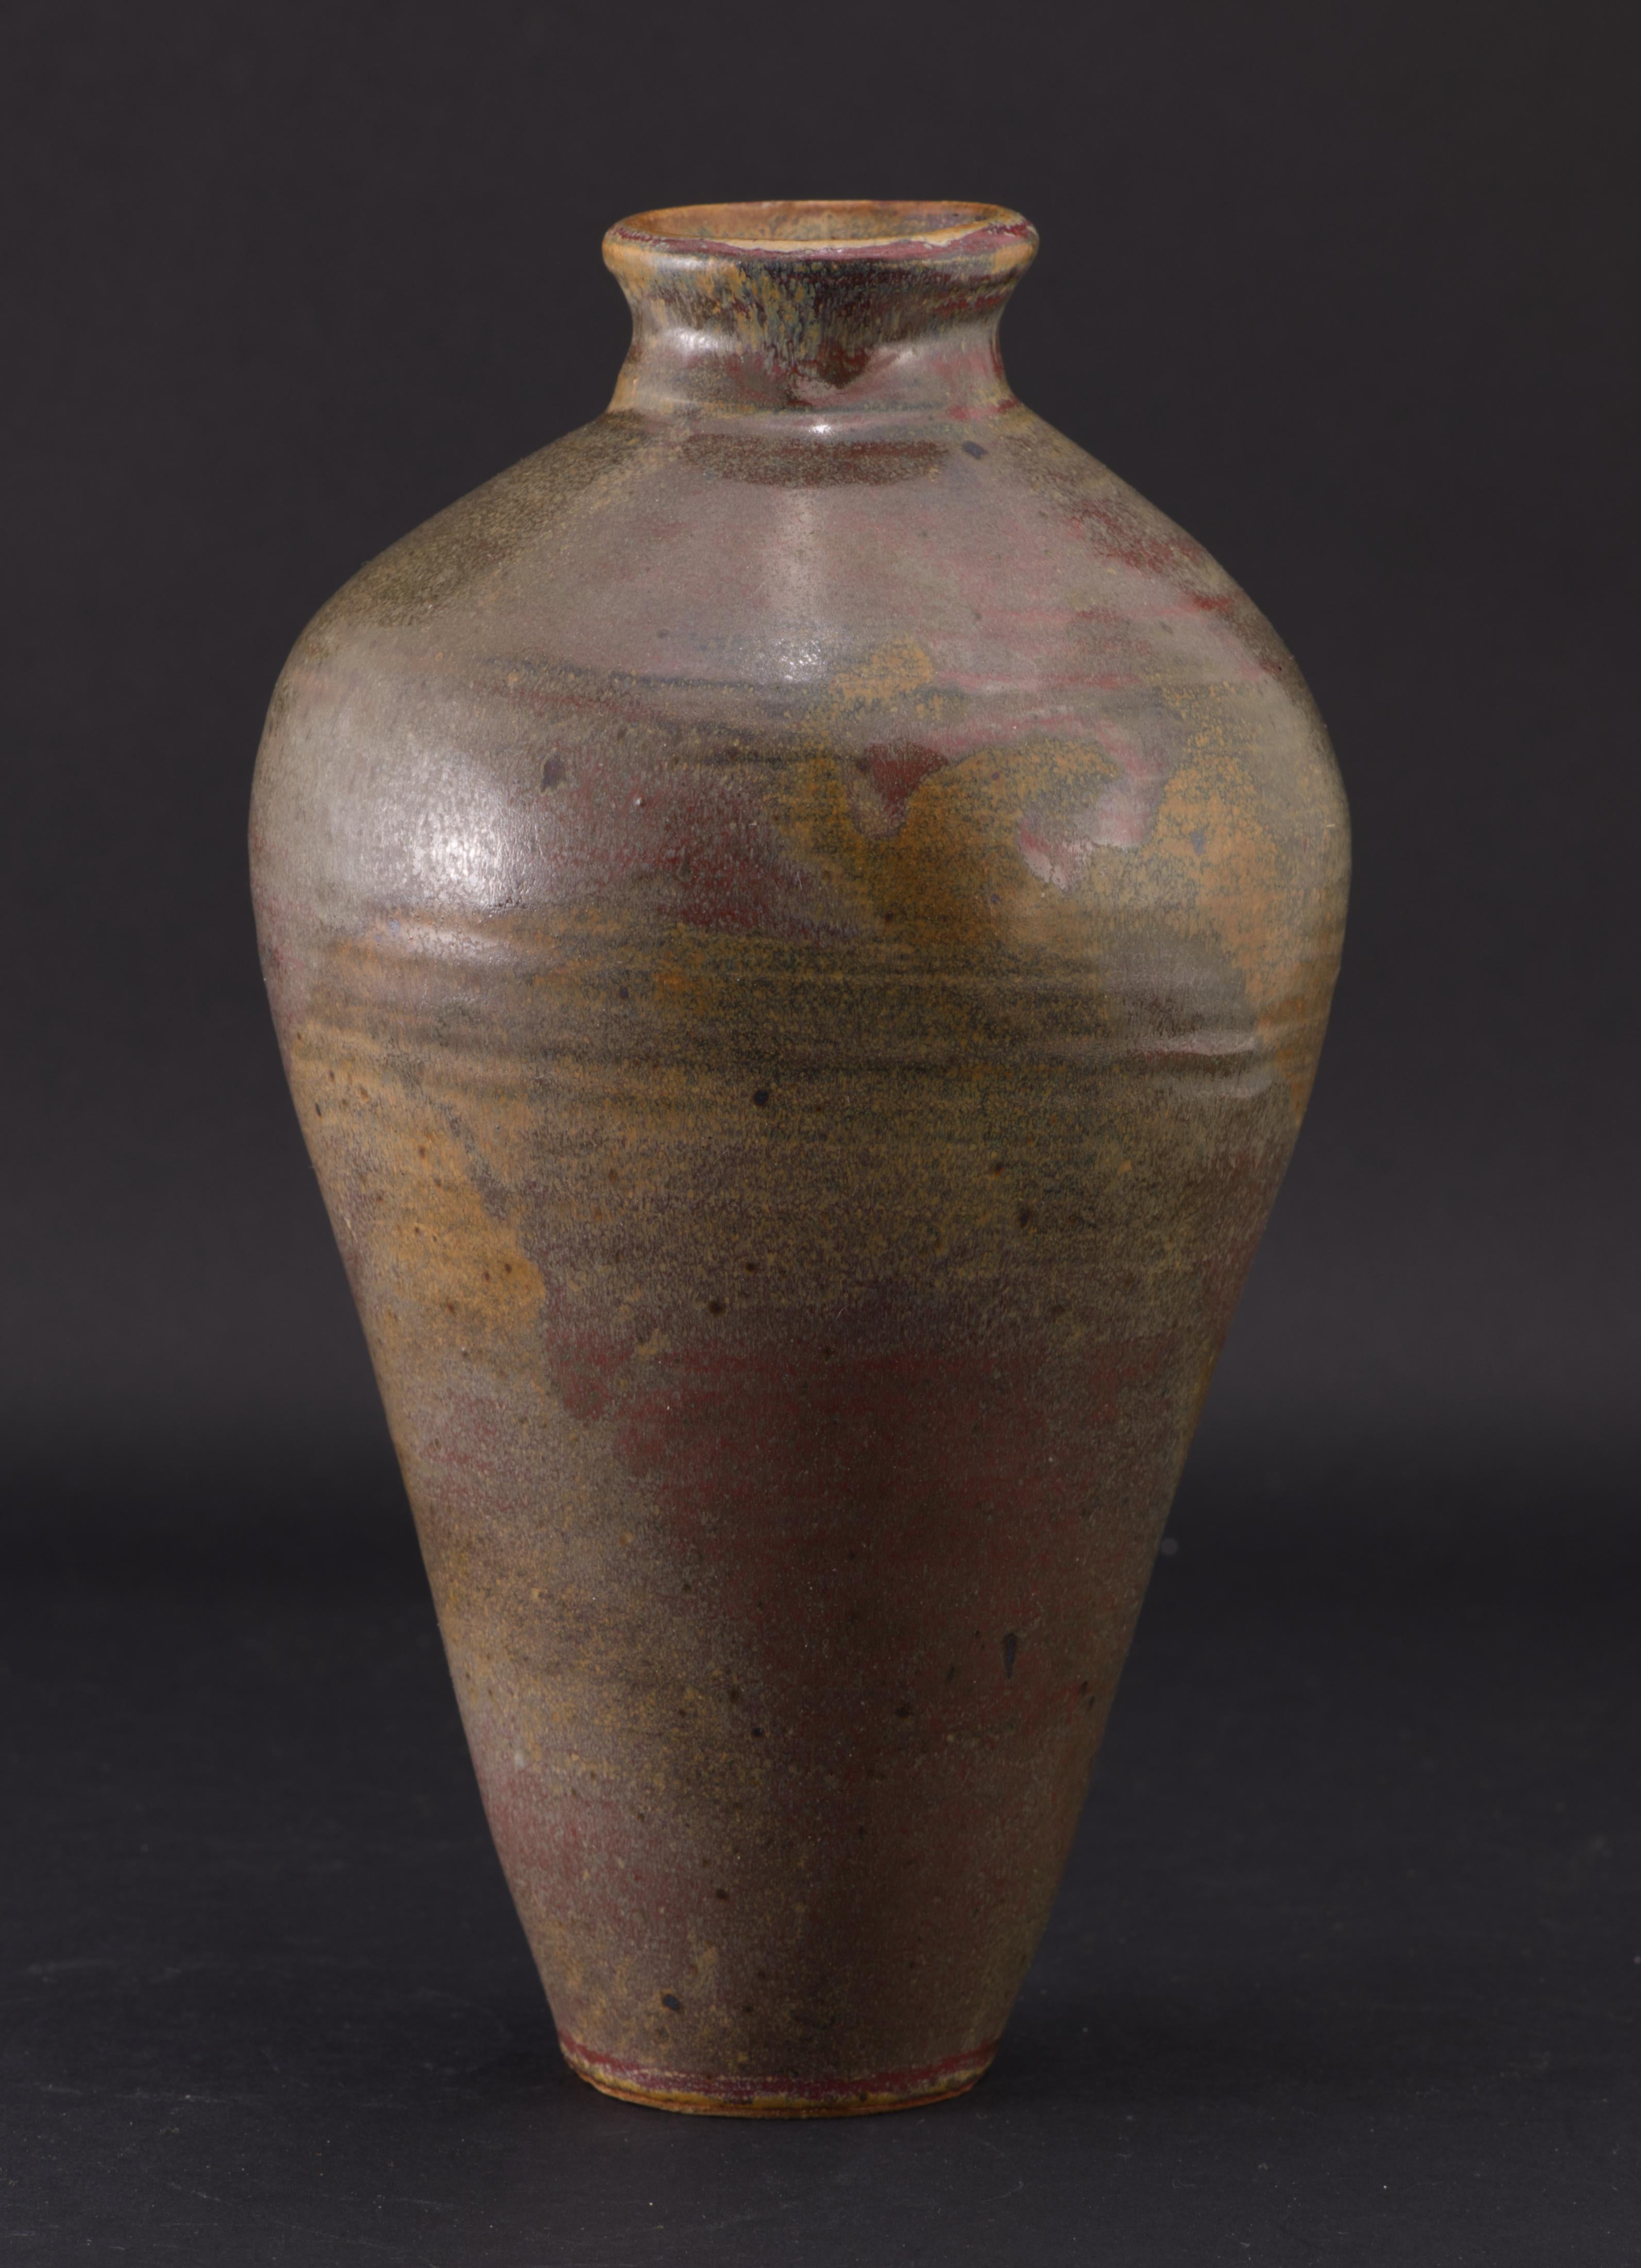  Beautiful hand thrown vase in classic amphora shape has narrow base and opening, contrasting with the wide body. The opening rim and curvature of the upper portion of the body are slightly asymmetrical, exemplifying the appeal of hand-made piece.